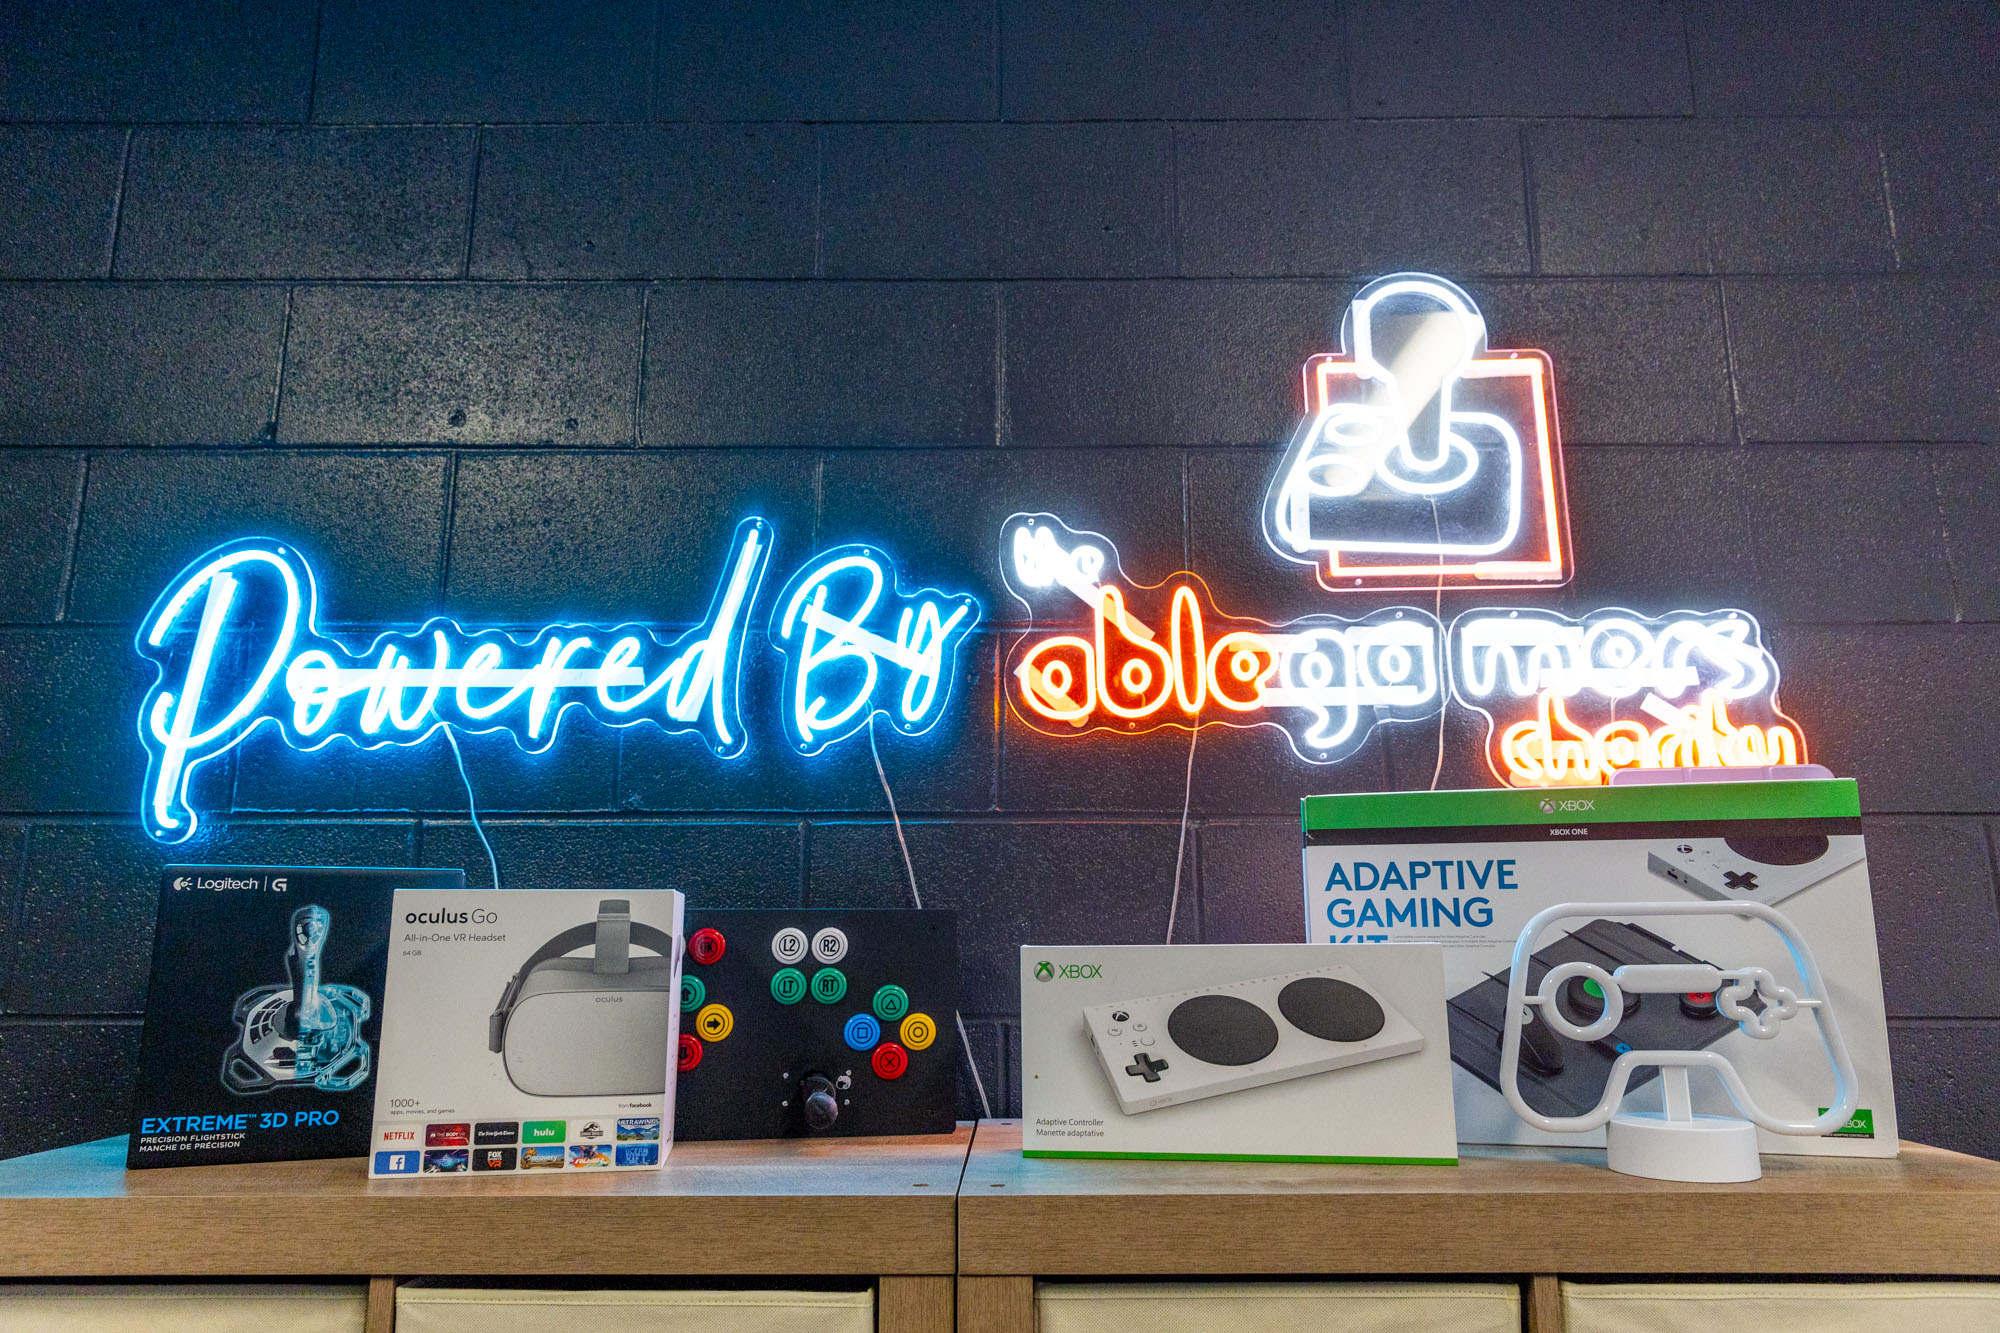 Able Gamers light up sign